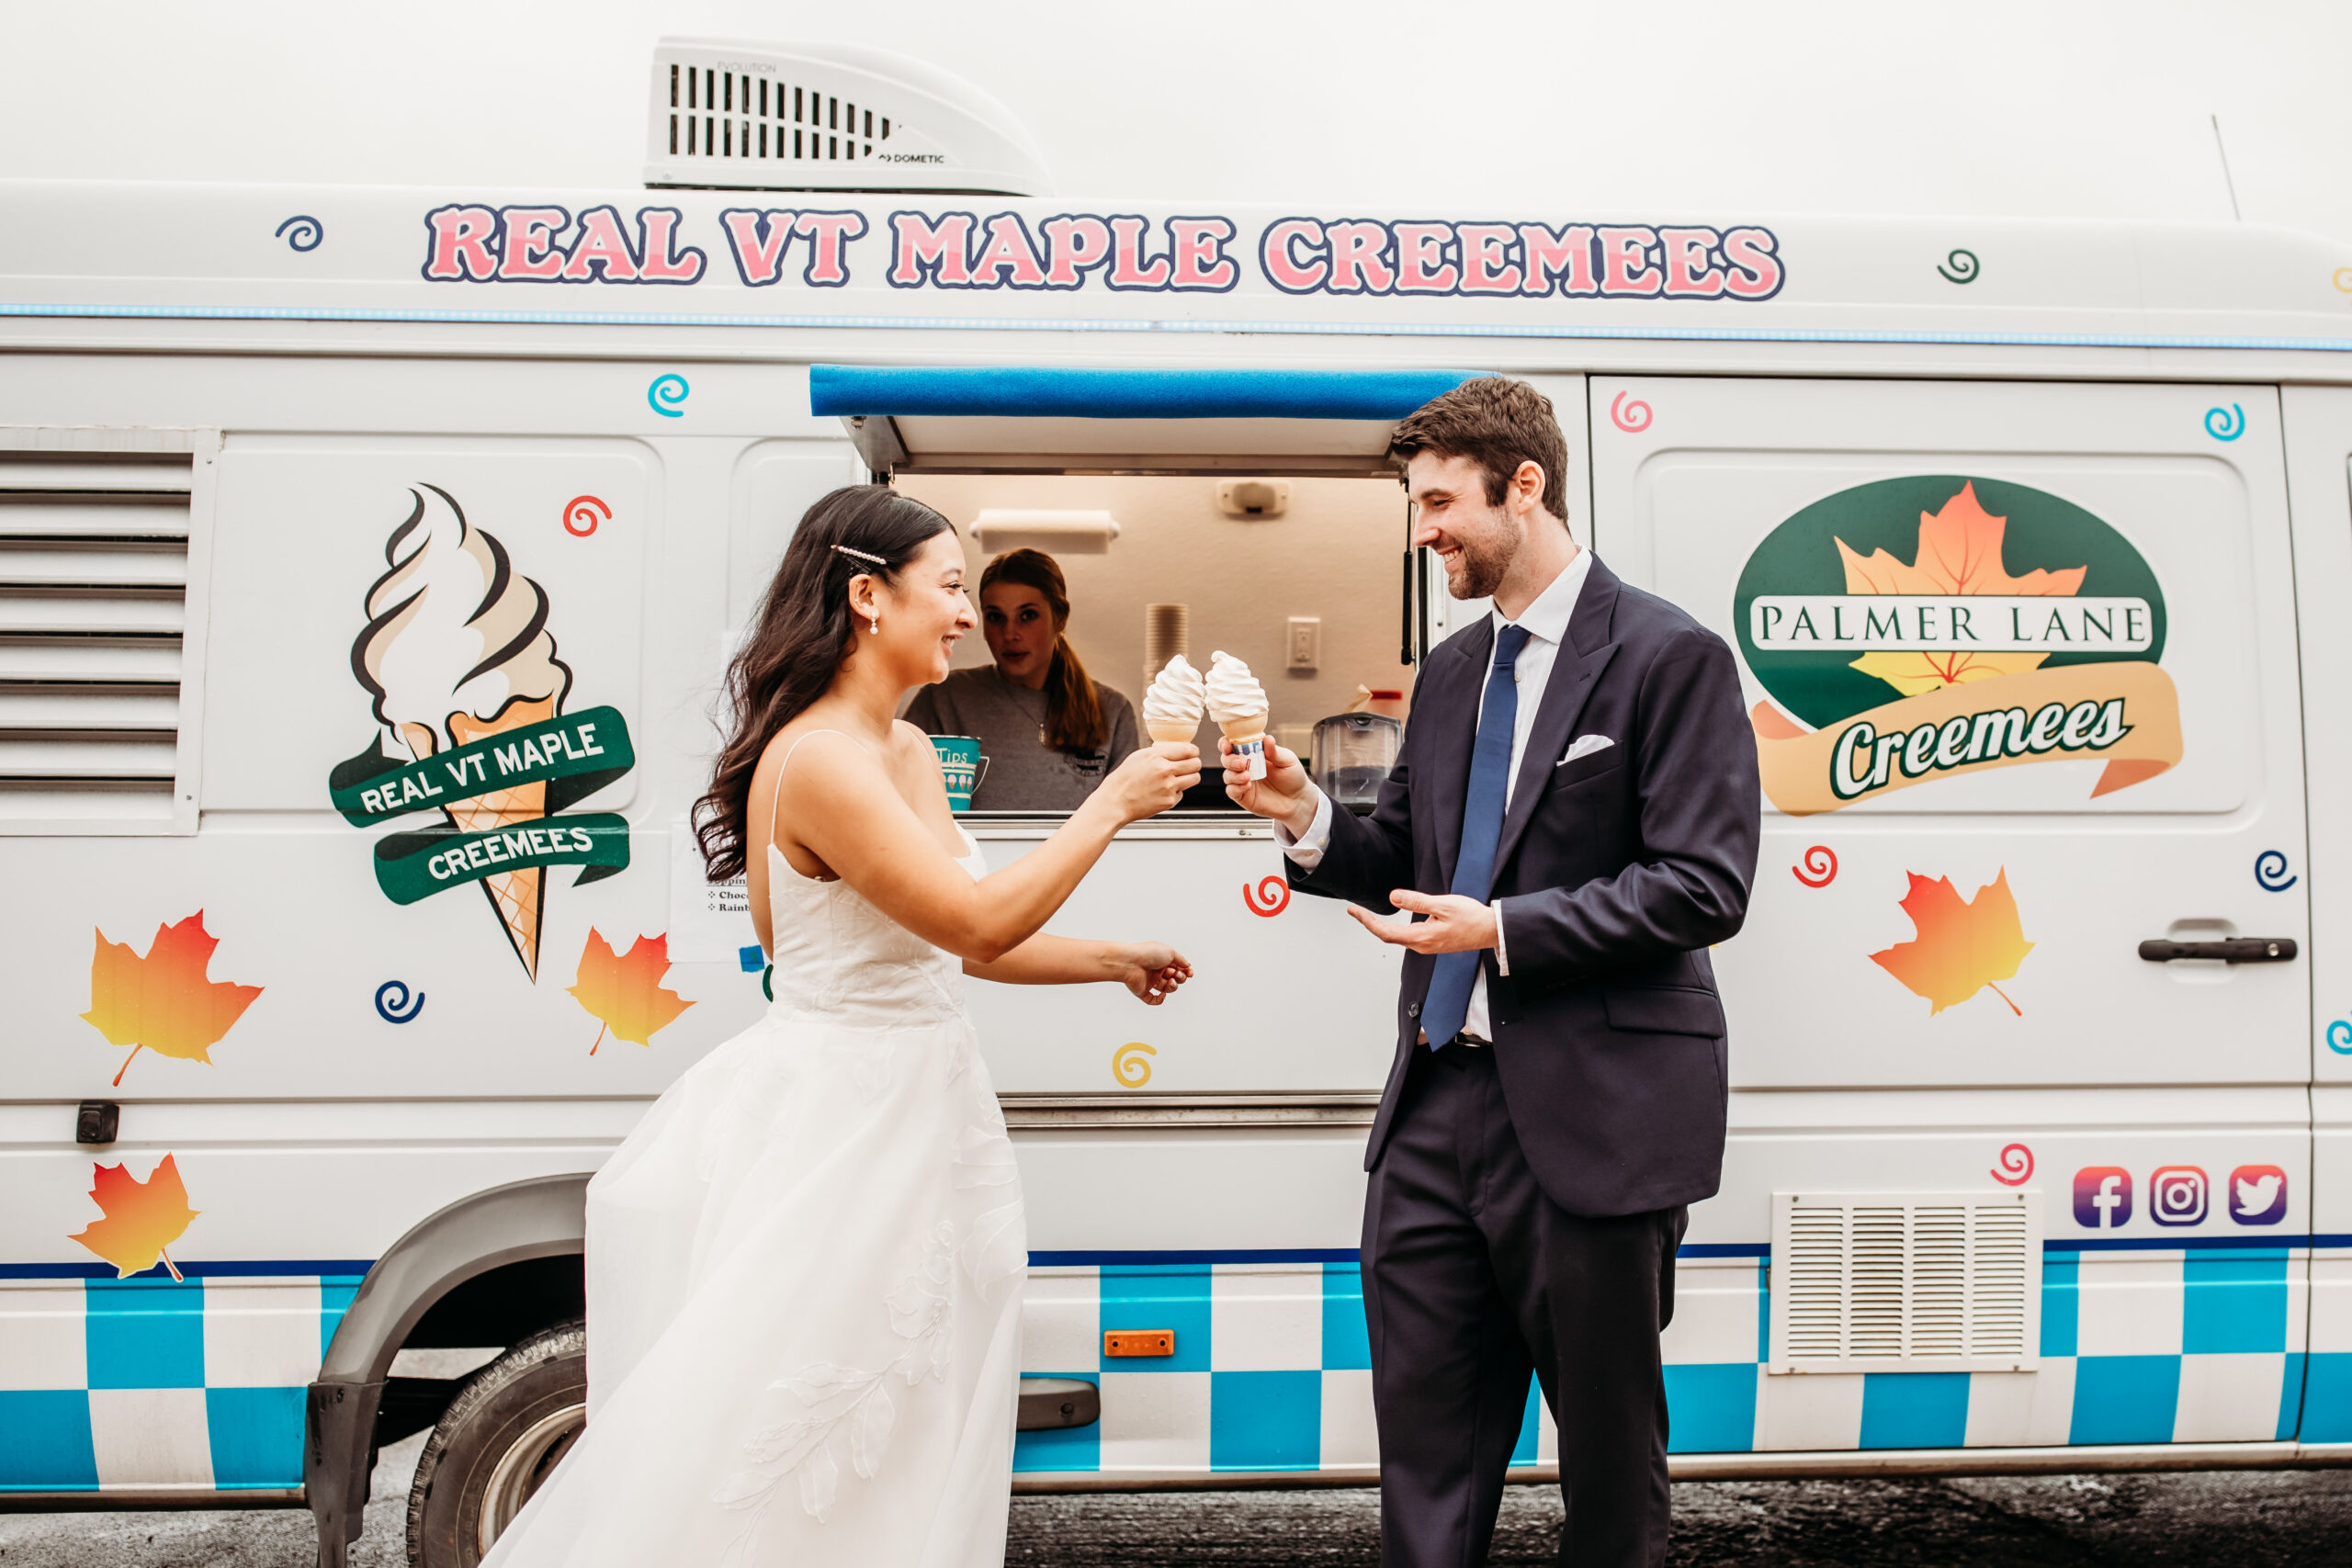 A couple enjoying Vermont maple creemees together from the Palmer Lane Maple creemee truck at their summer wedding in Vermont.